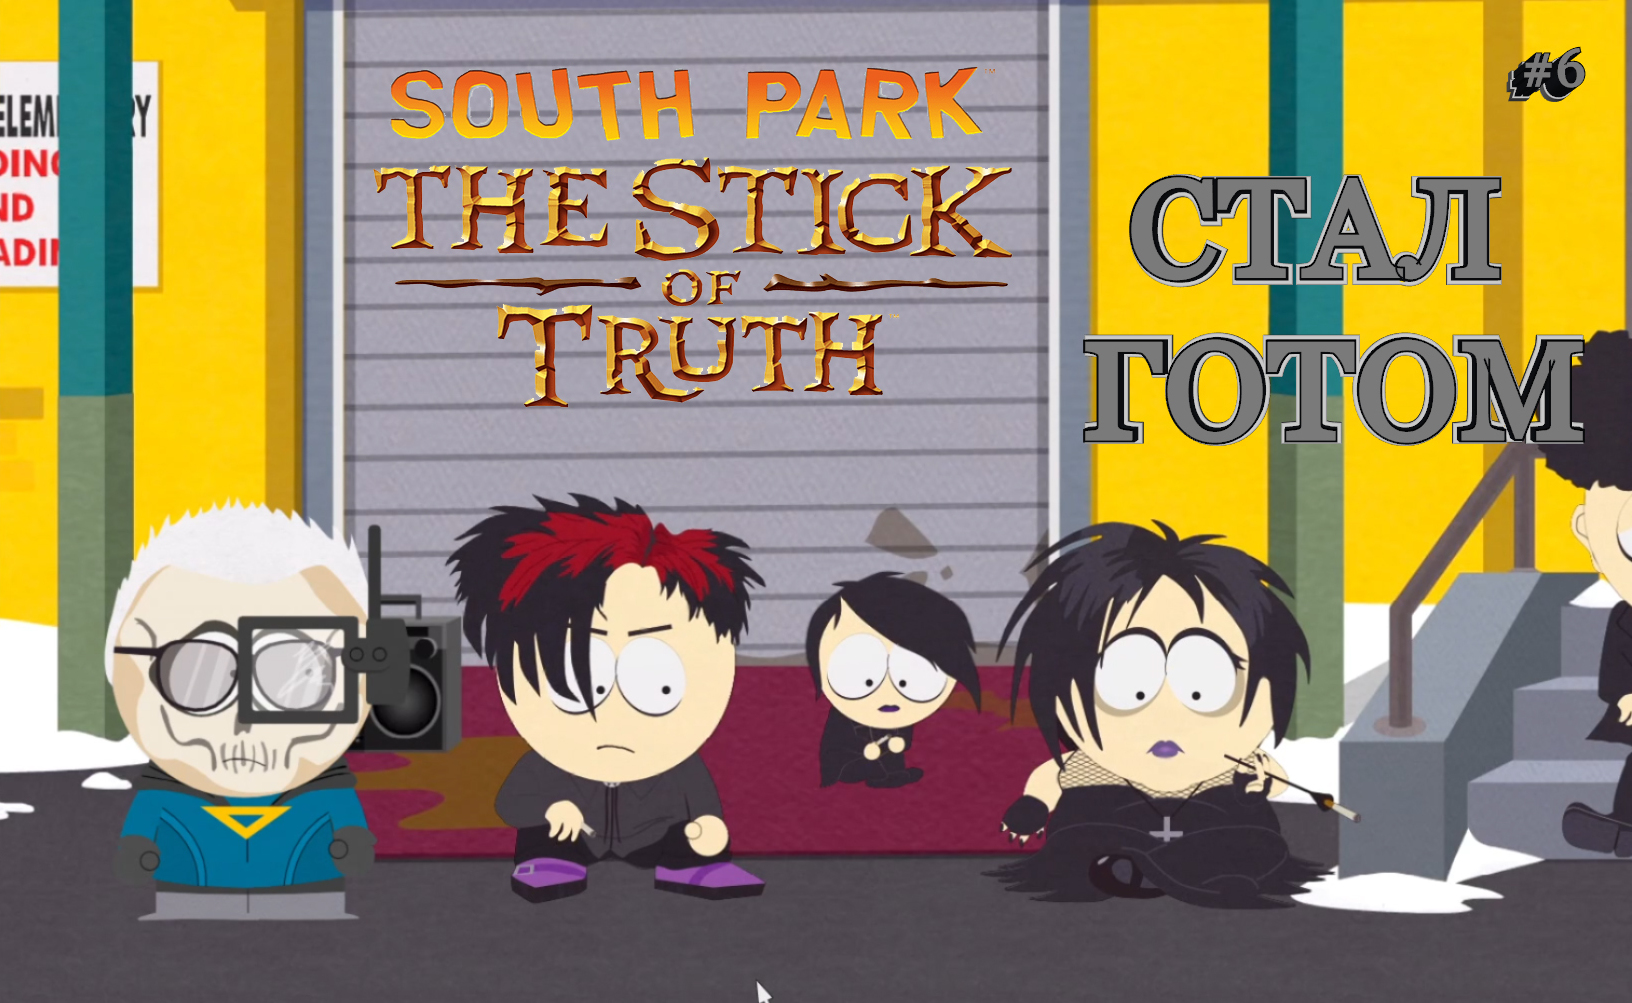 South Park: The Stick of Truth #6. СТАЛ ГОТОМ.